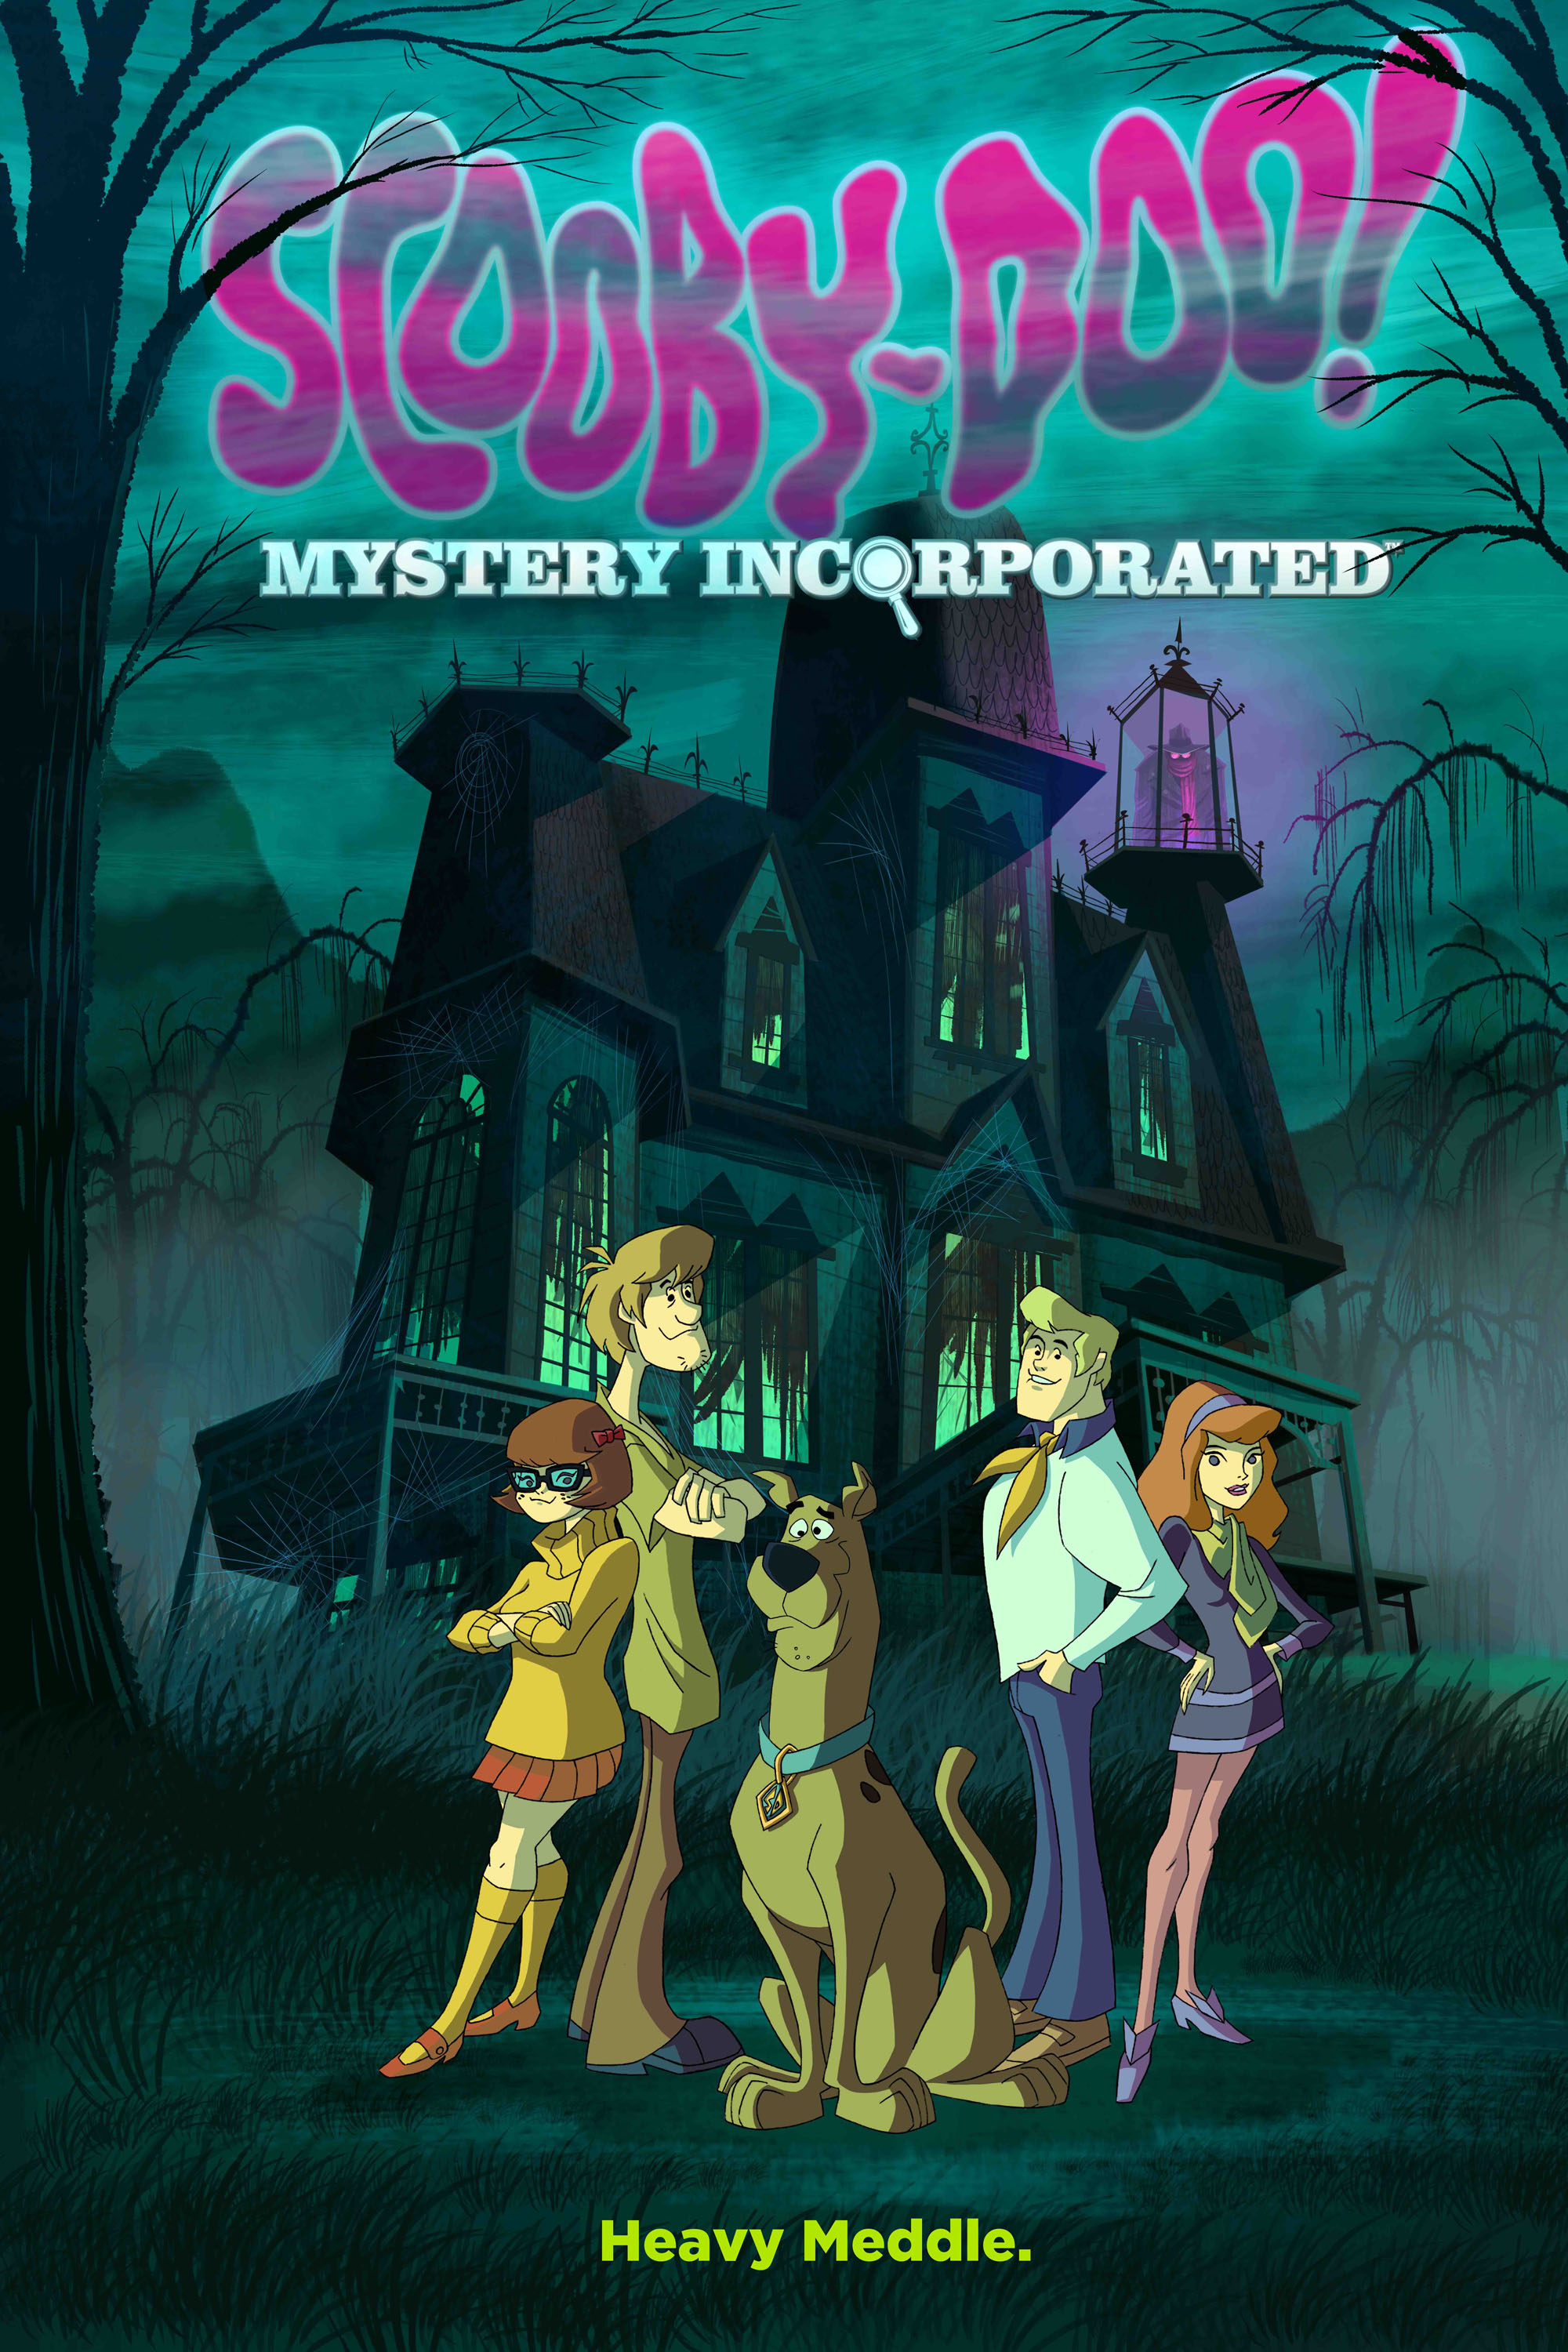 brian carlo rivera recommends Scooby Doo Mystery Incorporated Xxx